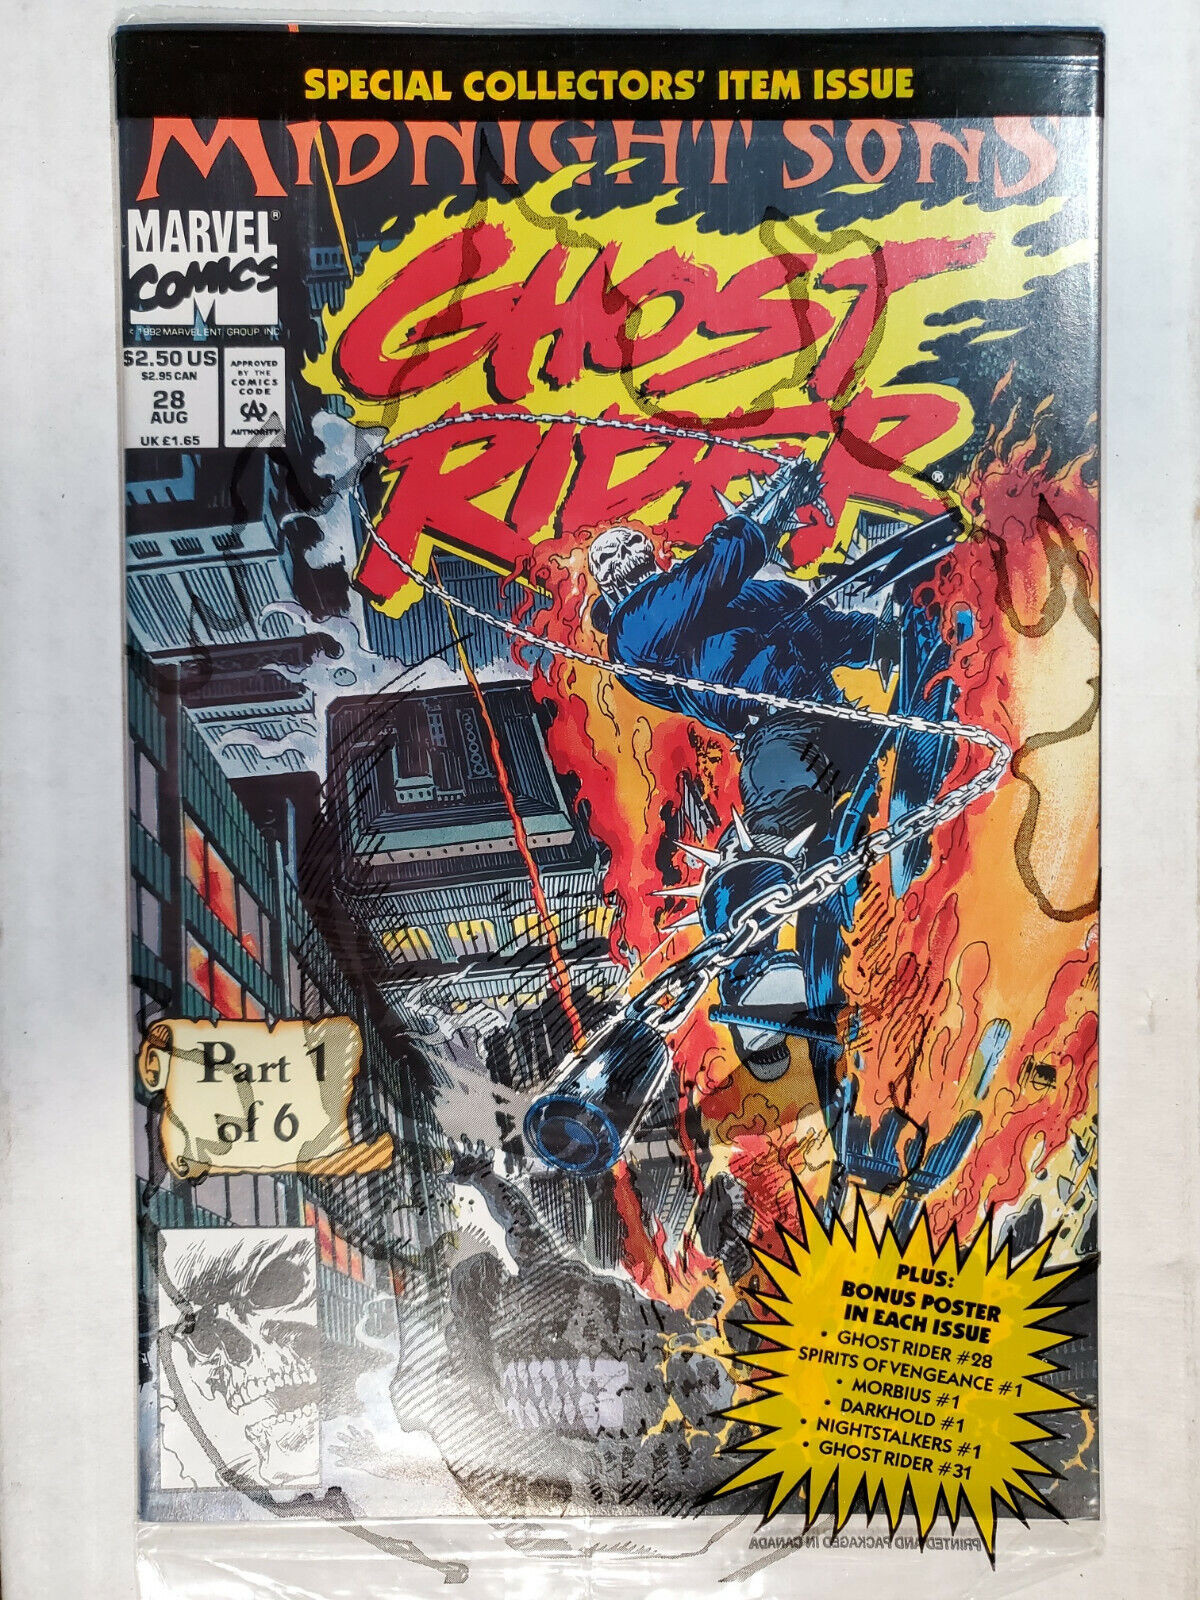 GHOST RIDER #28 Rise of the Midnight Sons